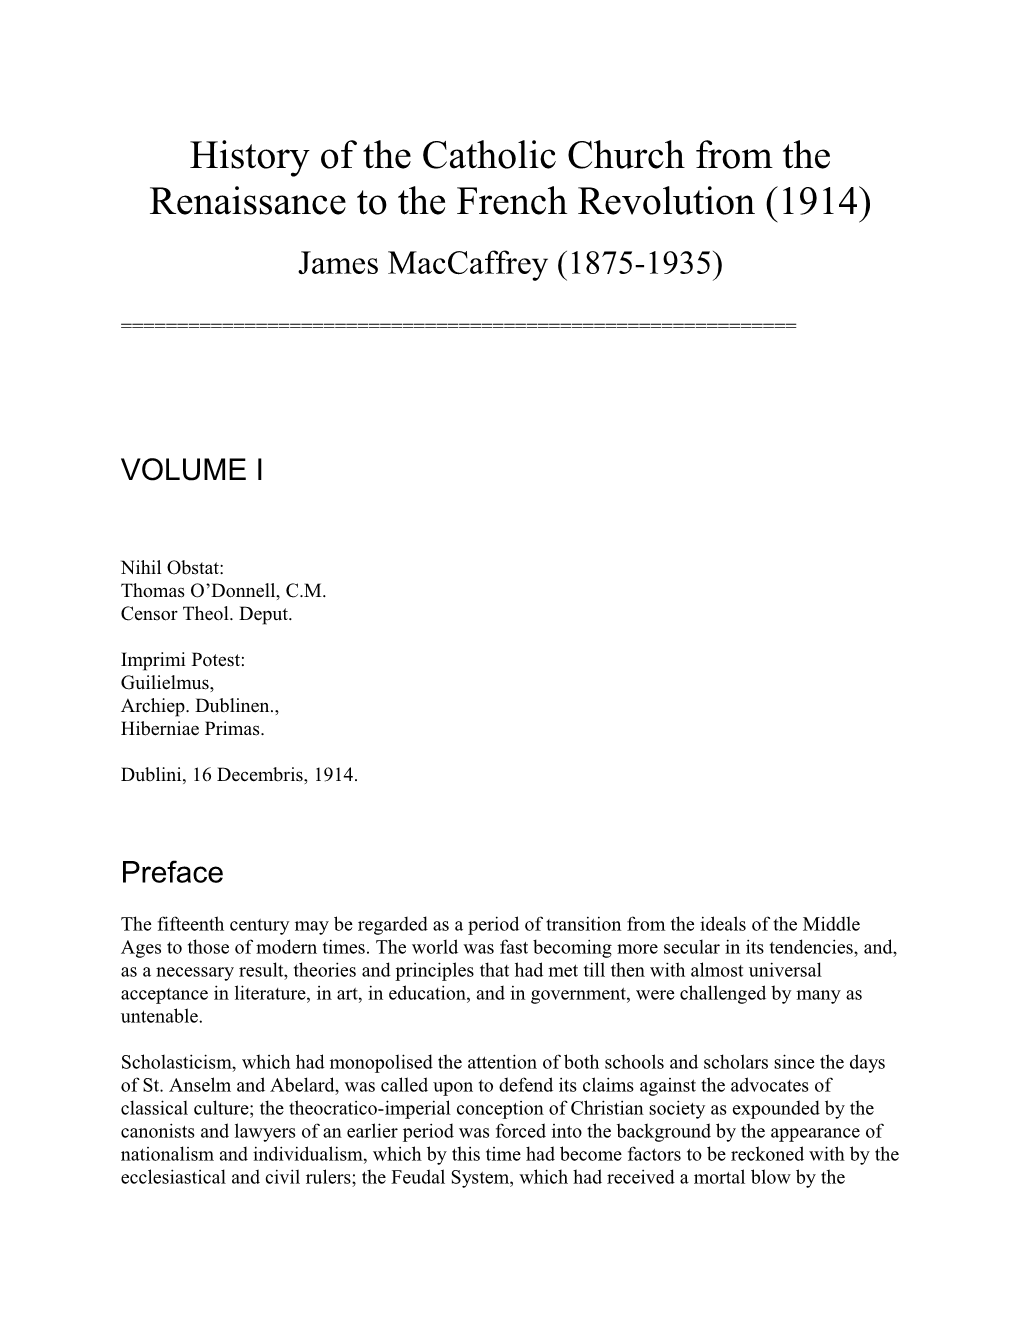 History of the Catholic Church from Therenaissance to the French Revolution (1914)